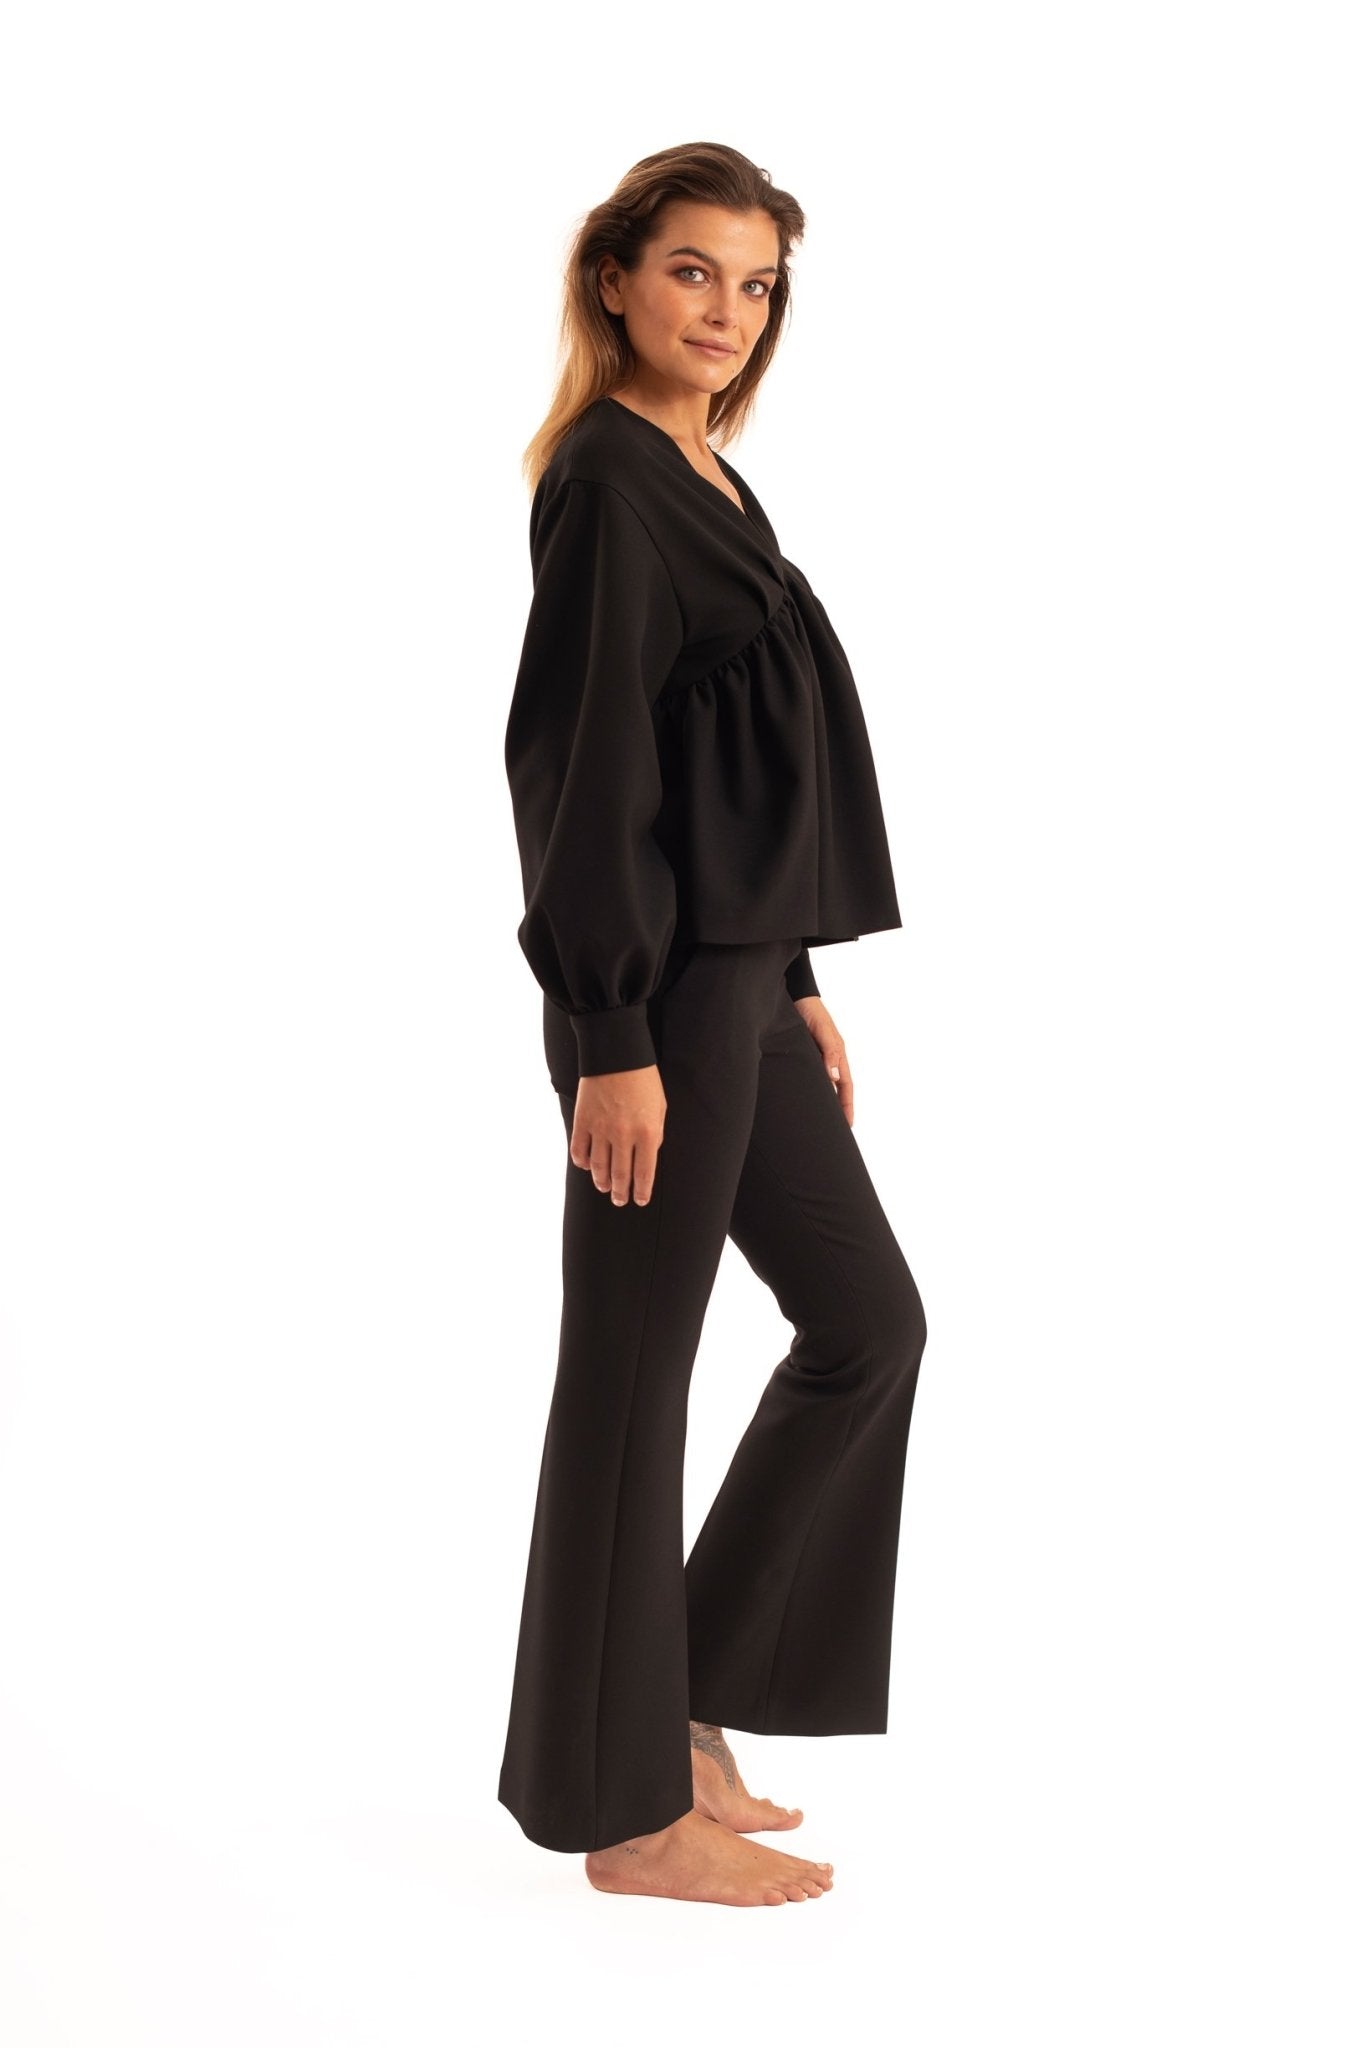 Black Balone Blouse - The Clothing LoungeNOPIN